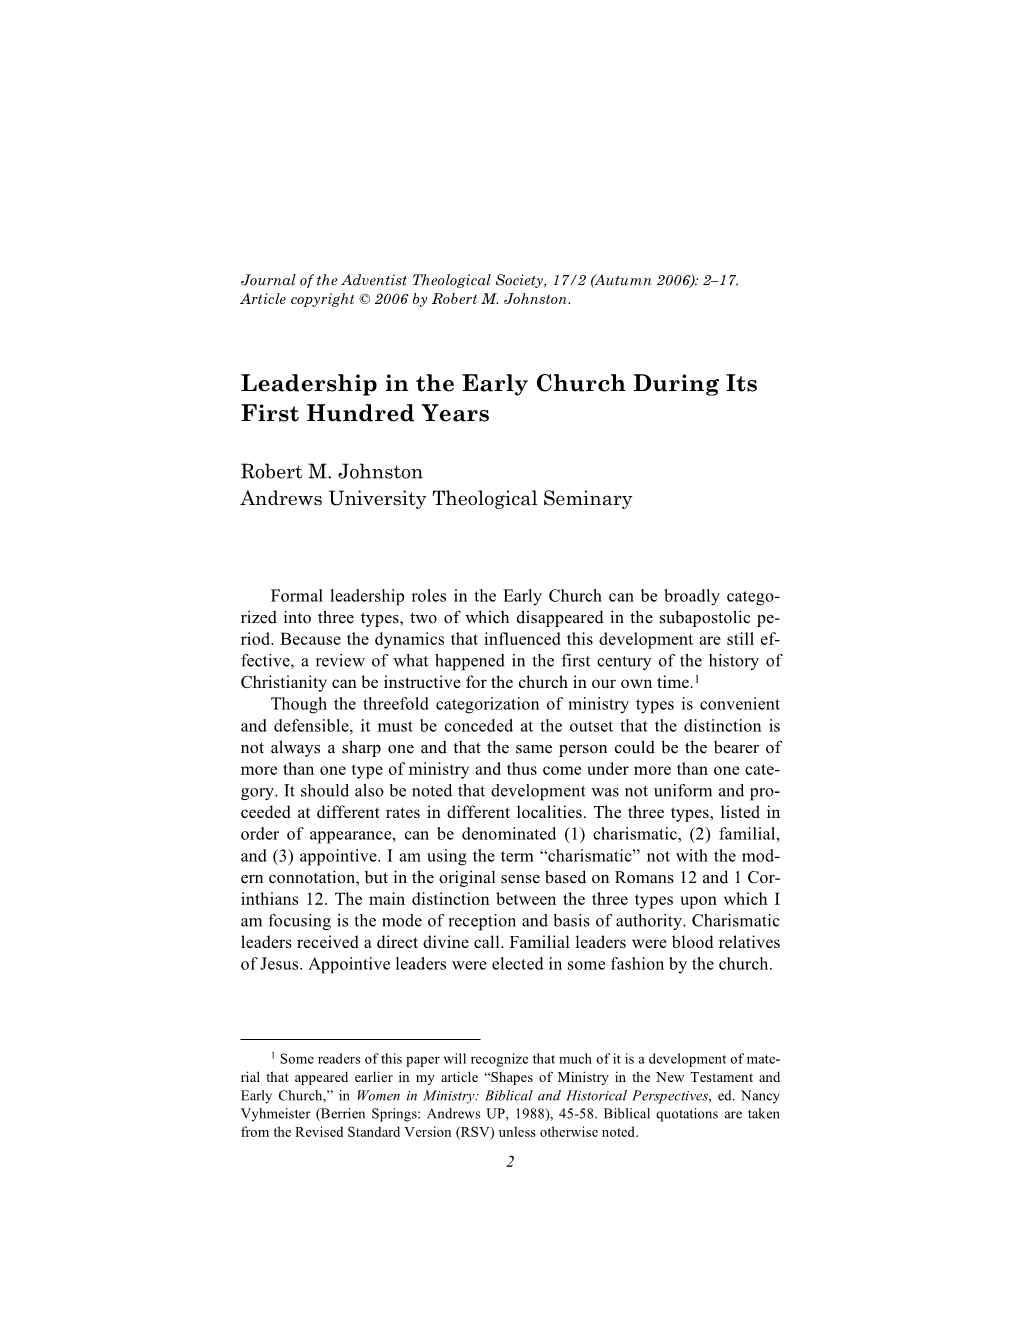 Leadership in the Early Church During Its First Hundred Years